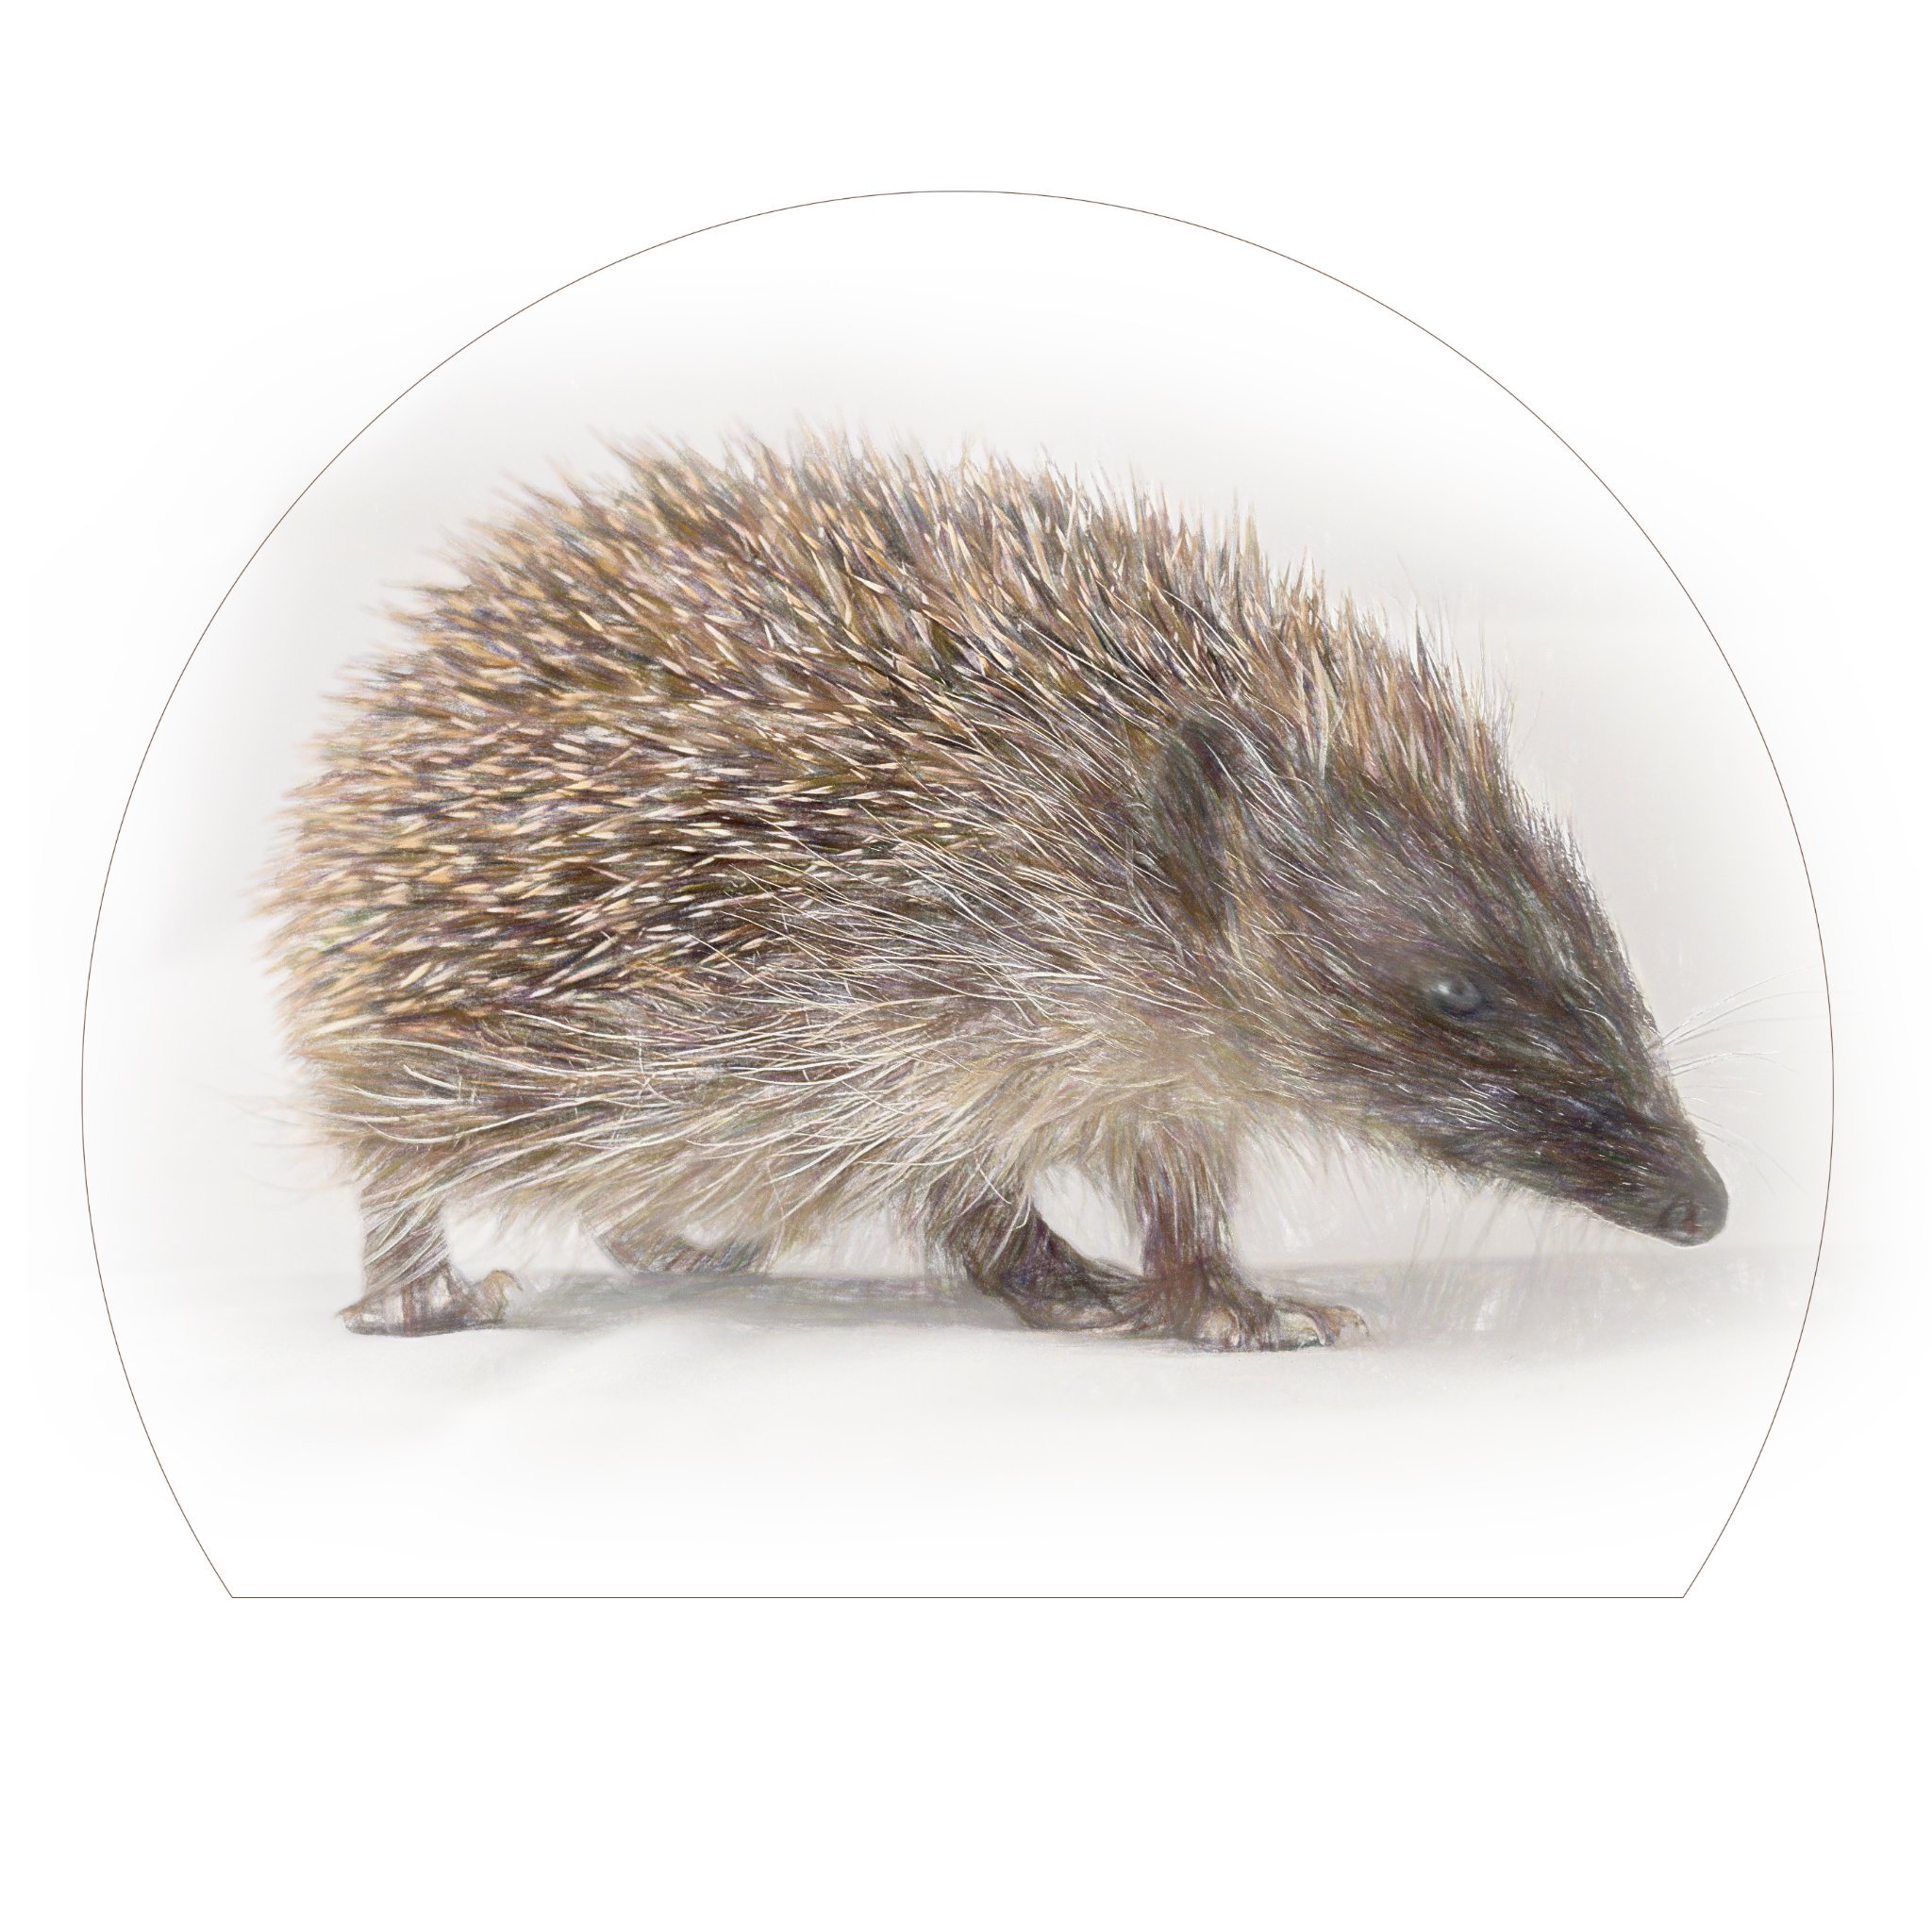 Pickering Hedgehog Rescue, helping to save wild hedgehogs.  
Member of the British Hedgehog Preservation Society.